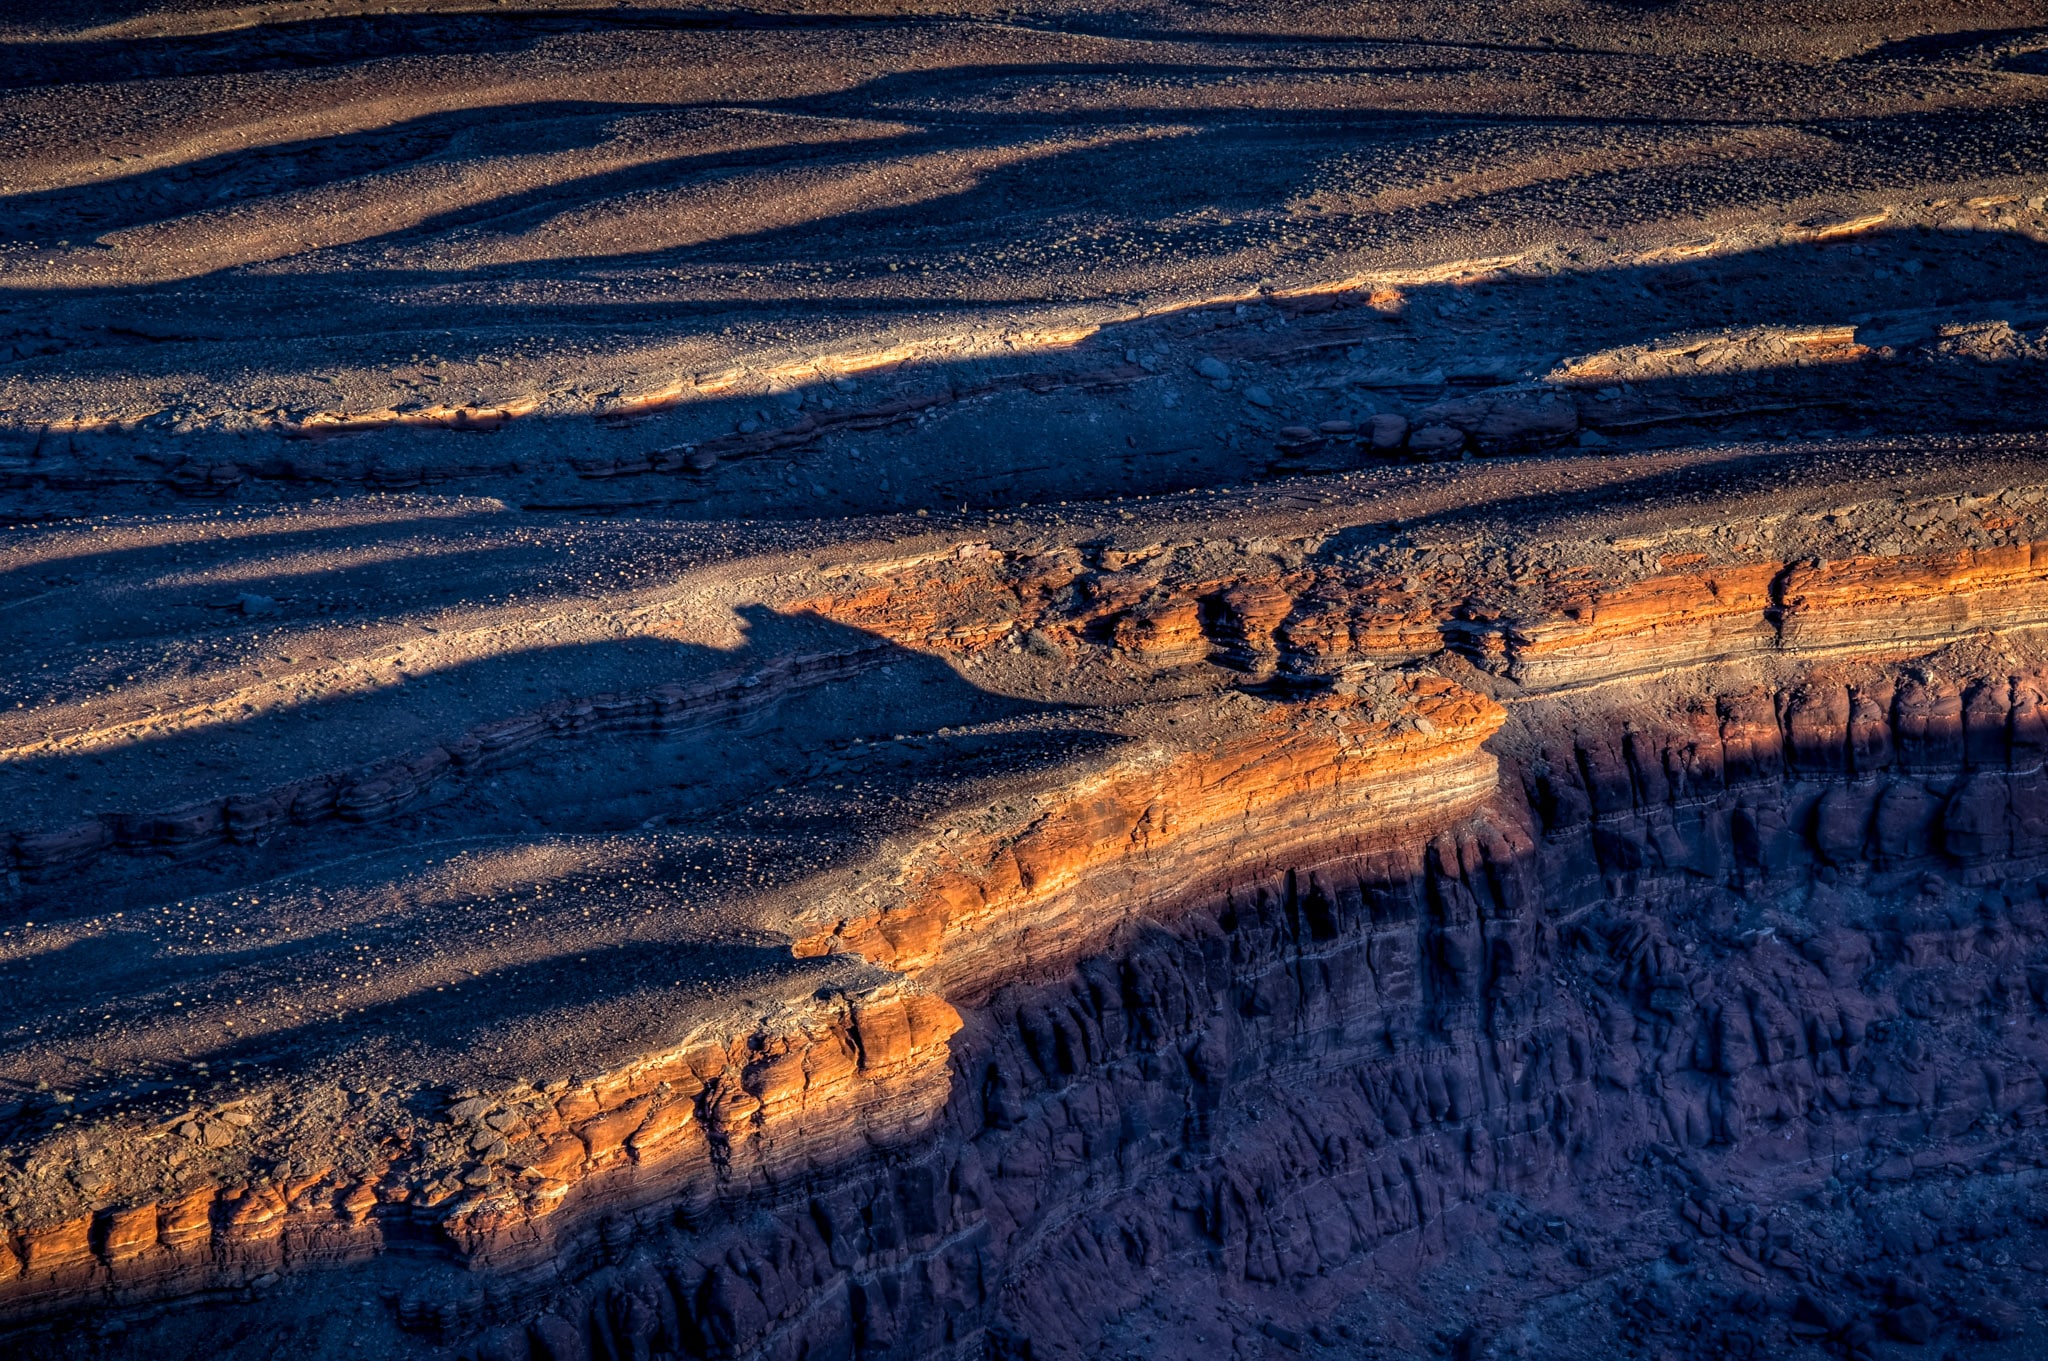 Sunset light catches the lip of the plateau below Dead Horse Point near Moab, Utah.